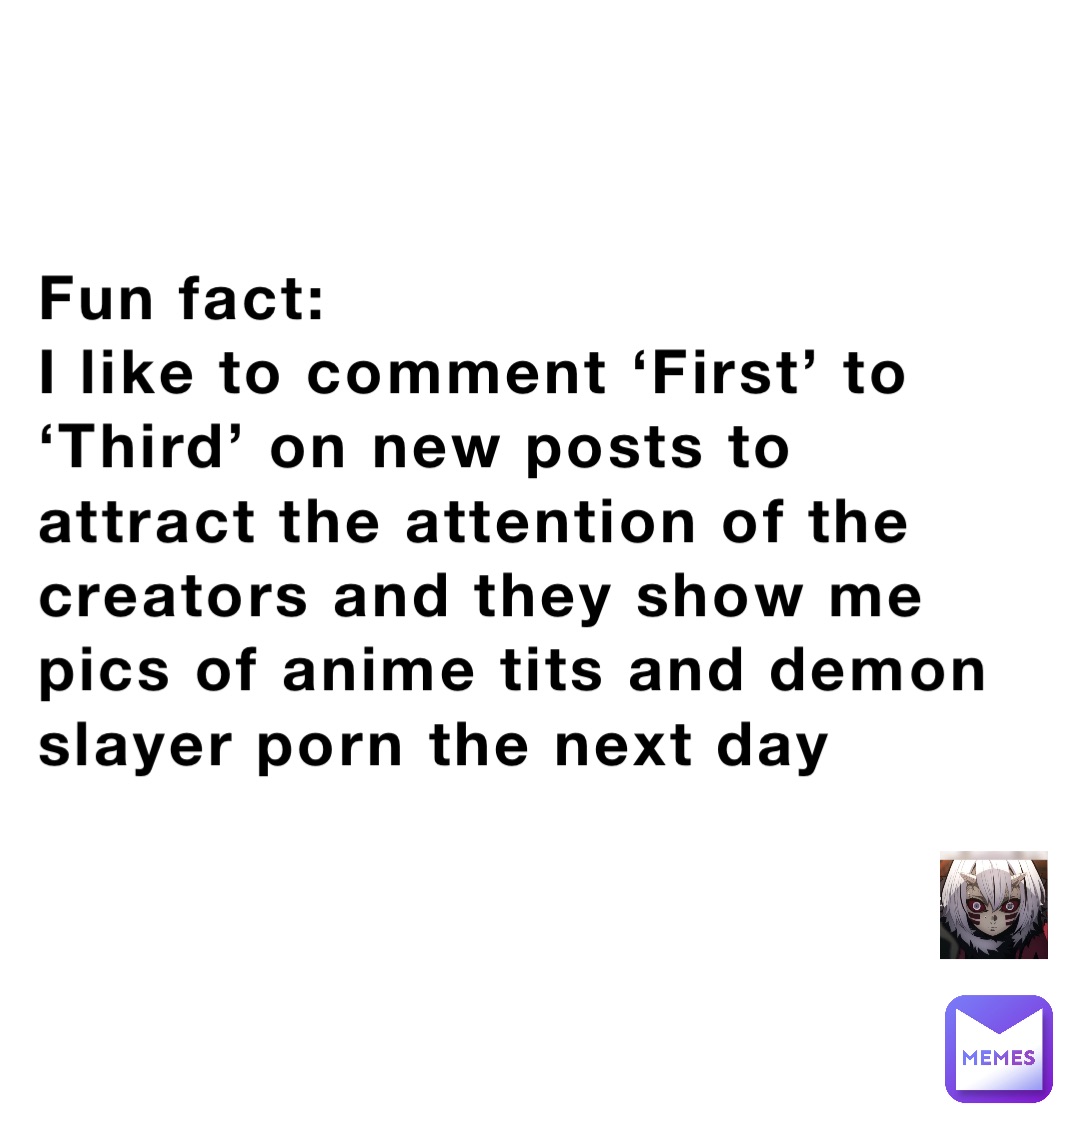 Fun fact:
I like to comment ‘First’ to ‘Third’ on new posts to attract the attention of the creators and they show me pics of anime tits and demon slayer porn the next day